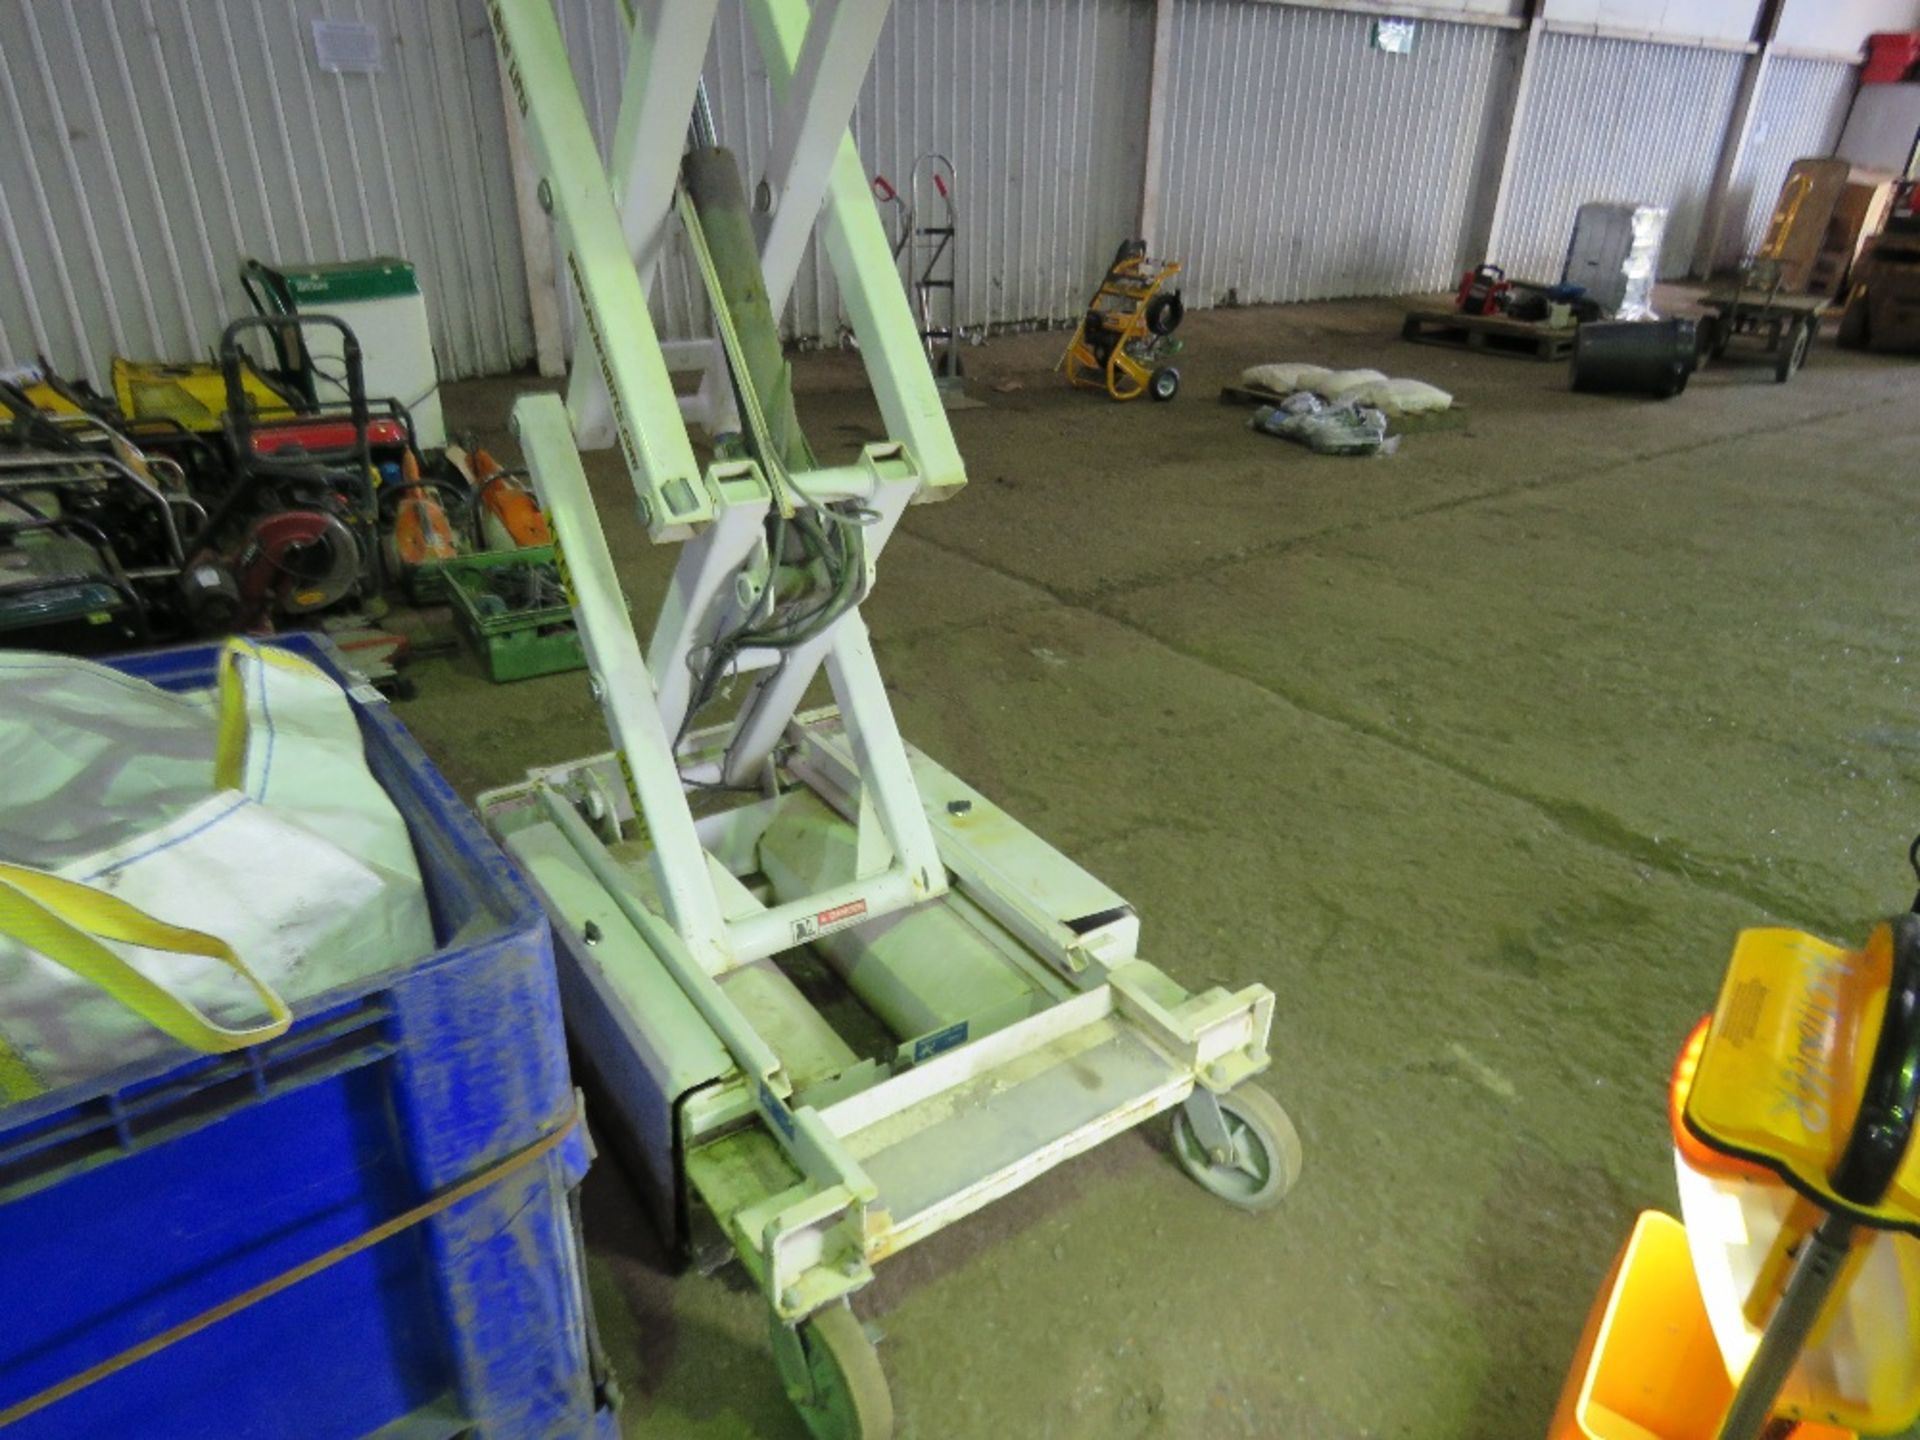 HYBRID HB830 SCISSOR LIFT ACCESS PLATFORM, 14FT MAX WORKING HEIGHT. SN:E0510228. WHEN TESTED WAS SEE - Image 4 of 4